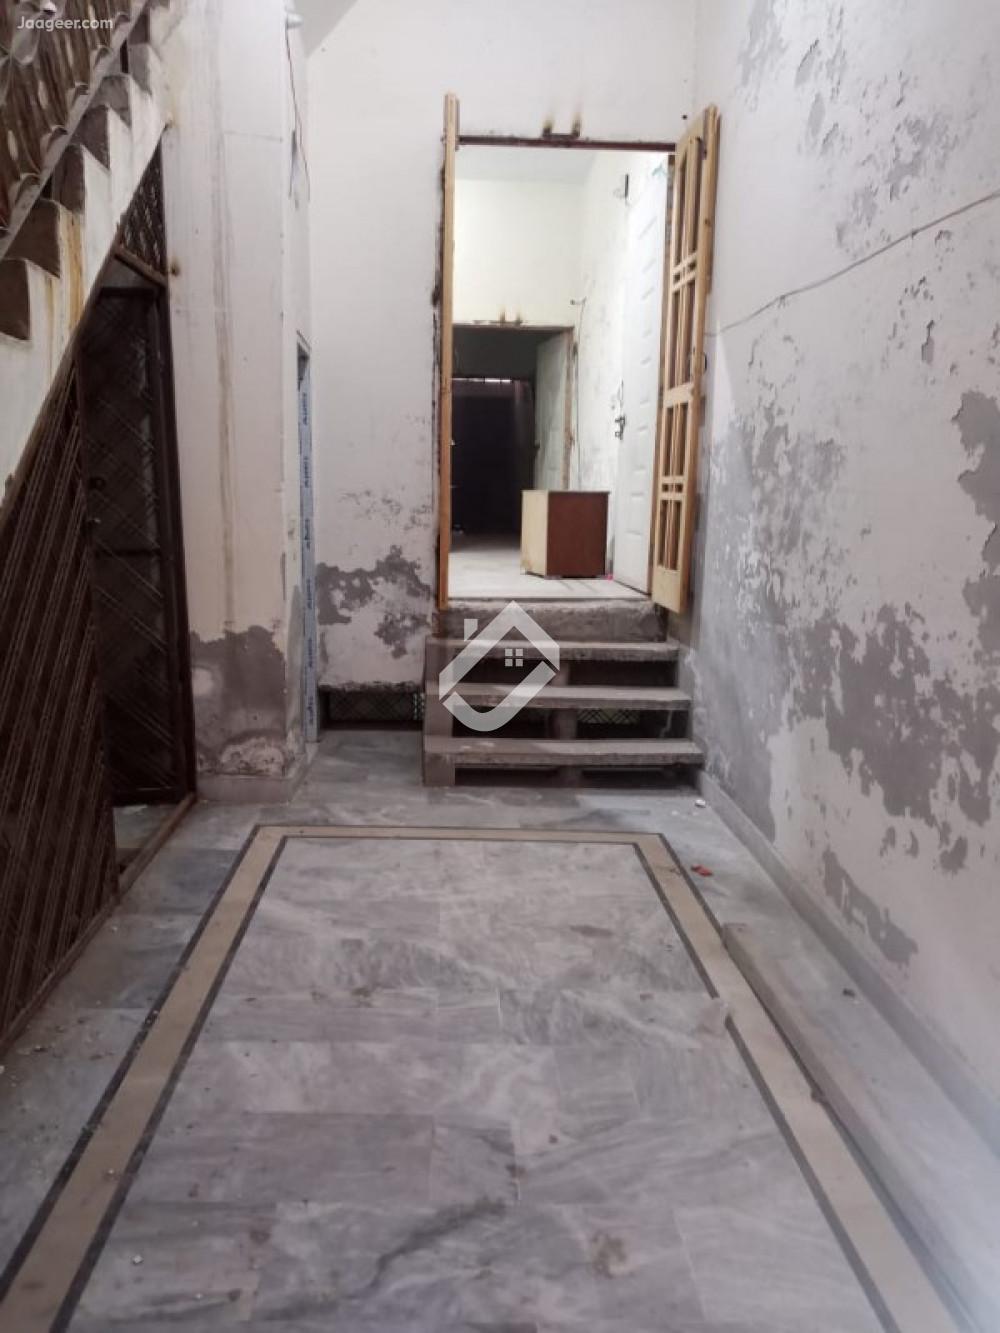 View  3.5 Marla House For Rent In Old Satellite Town Block A in Old Satellite Town, Sargodha